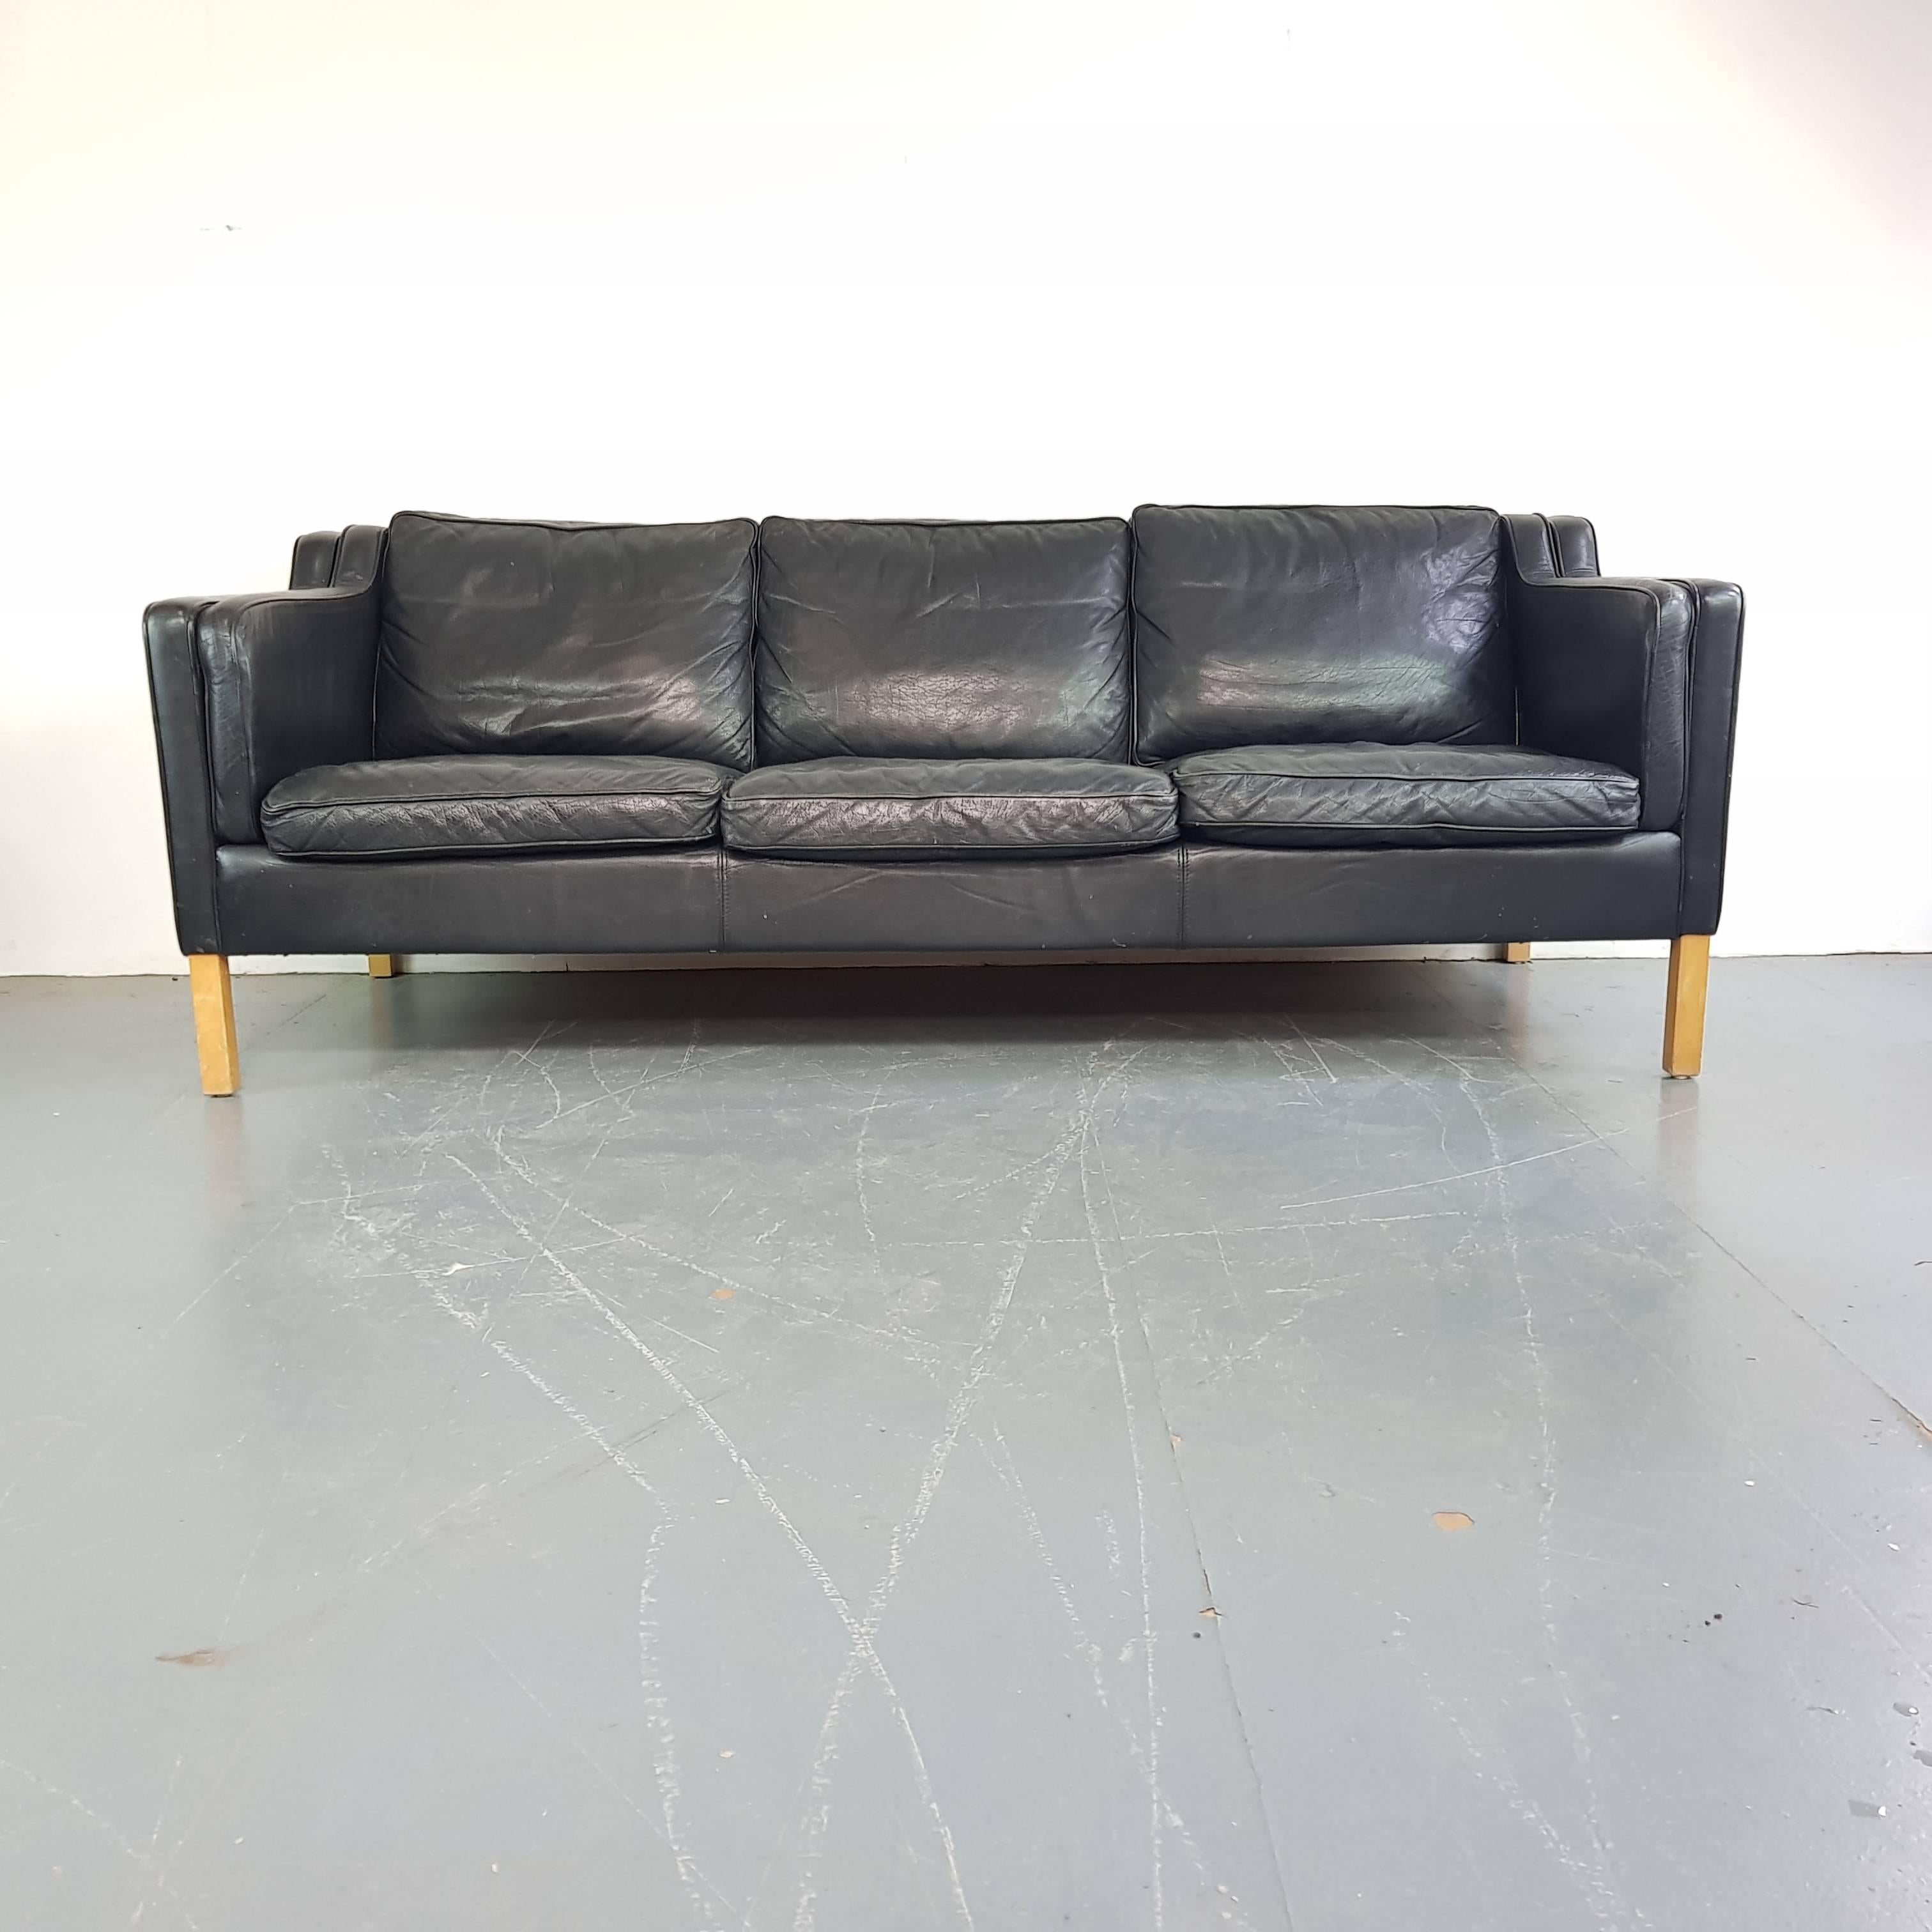 Gorgeous black leather Mogensen style 1970s three-seat Danish sofa made by Stouby of Denmark.
Detachable seat cushions. Wooden legs.

Approx dimensions:

Width 202cm

Height 74cm

Depth 86cm

Seat height 46cm.

In good vintage